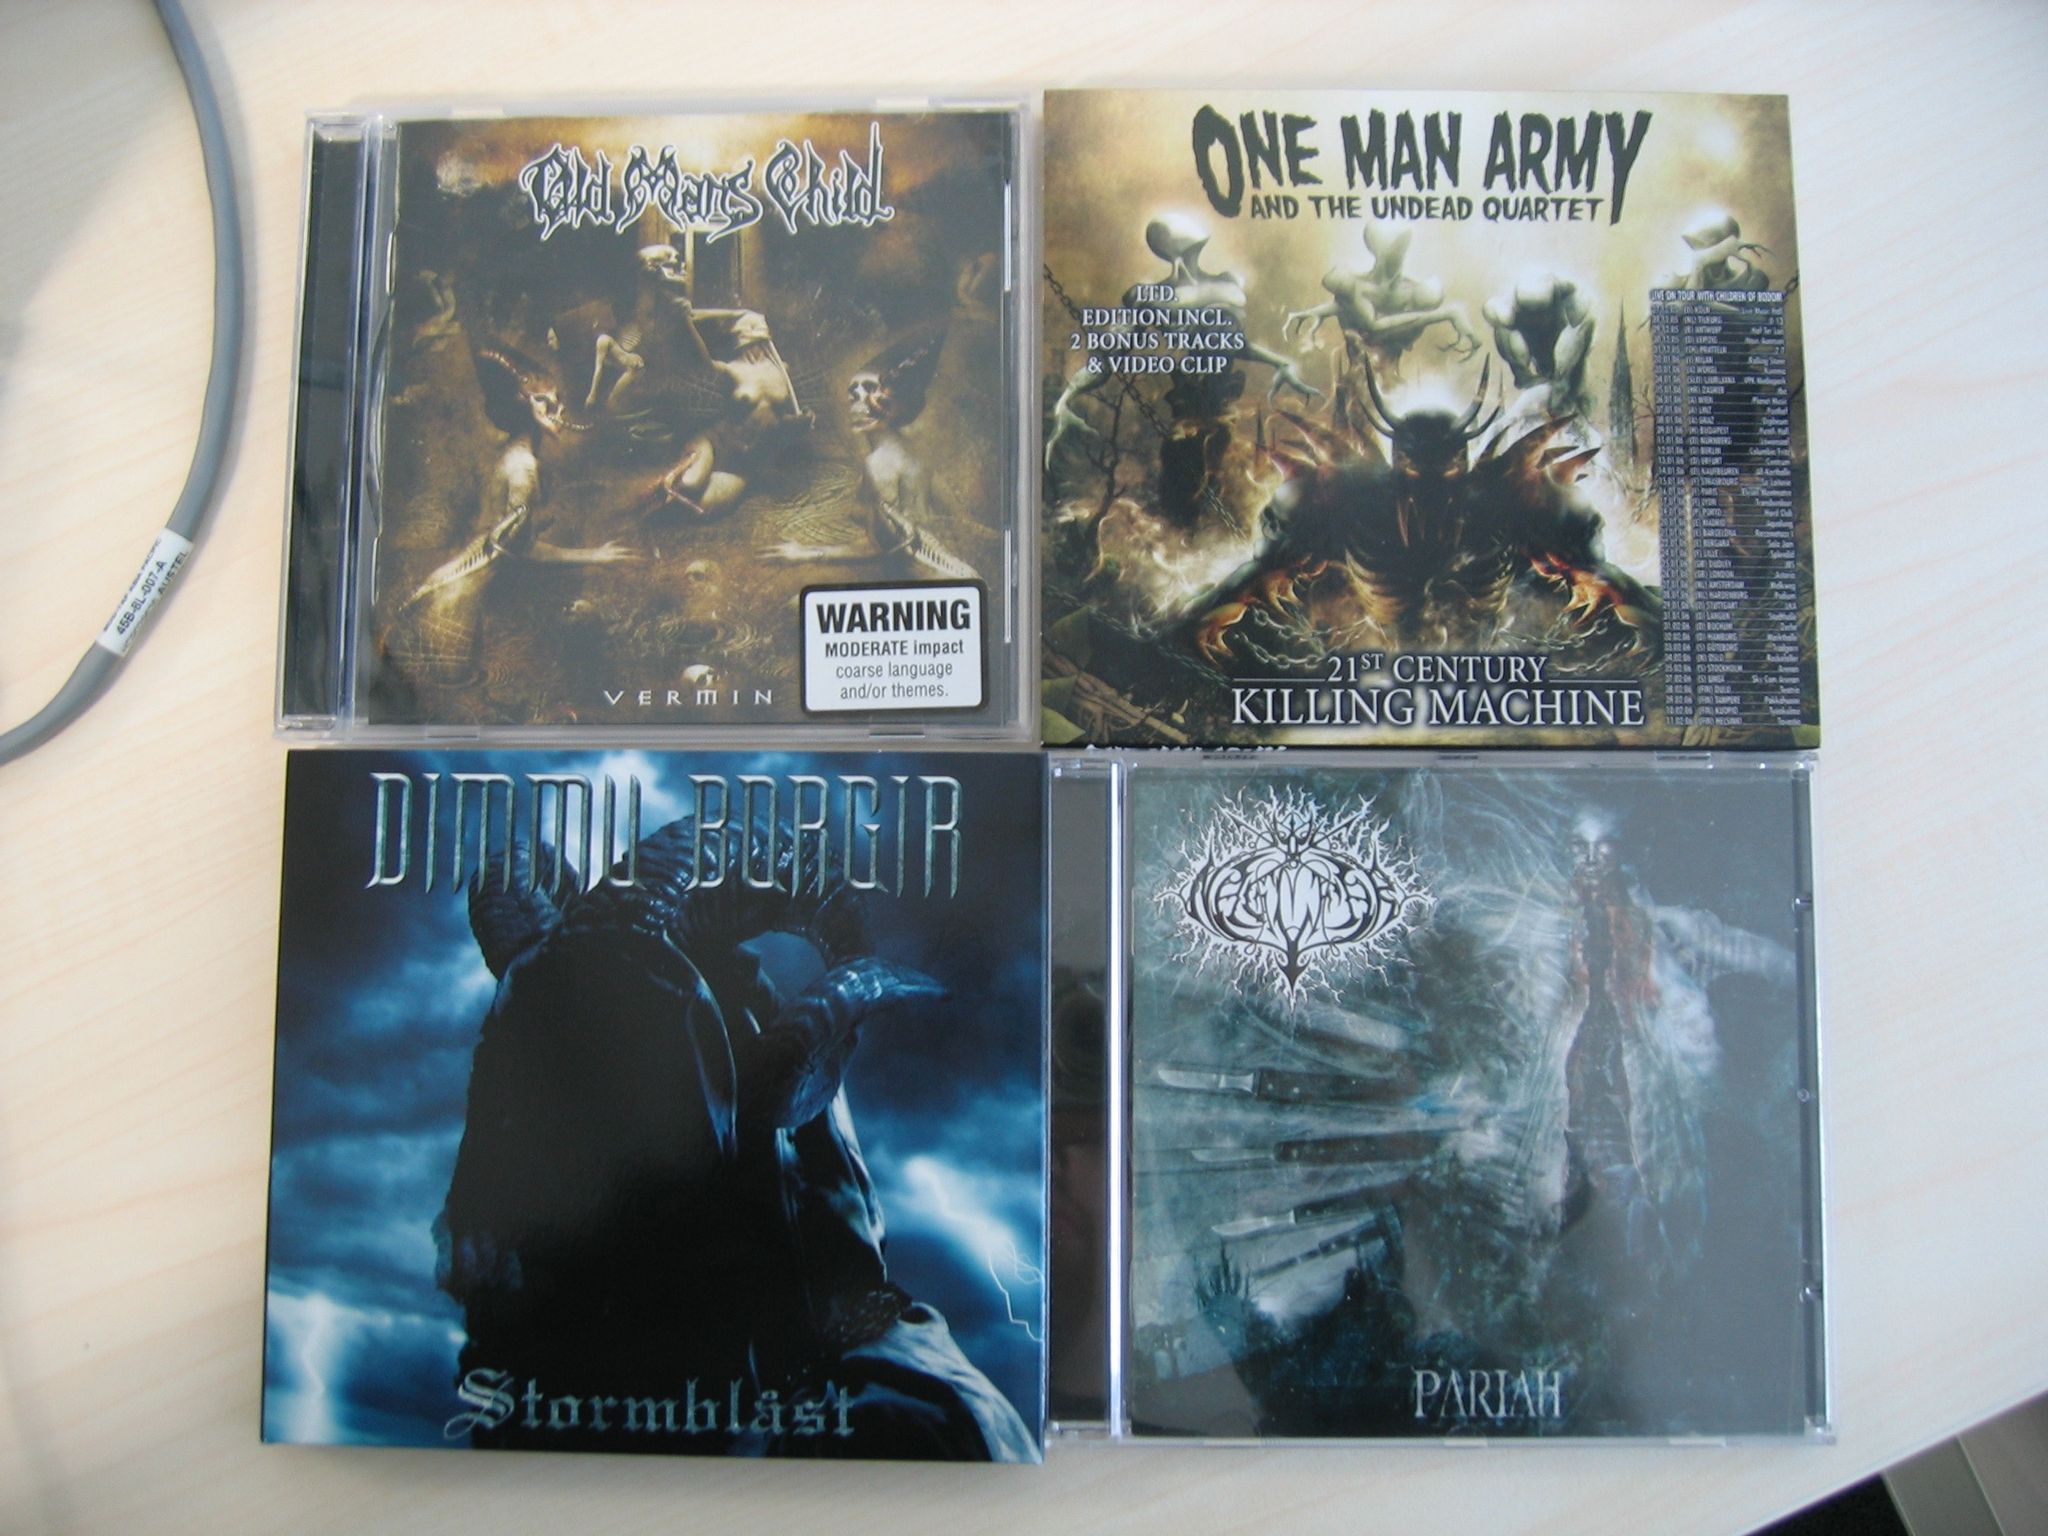 A photo of four CD jewelcases. The albums are Old Man's Child's "Vermin", One Man Army and the Undead Quartet's "21st Century Killing Machine", Dimmu Borgir's "Stormblåst", and Naglfar's "Pariah".